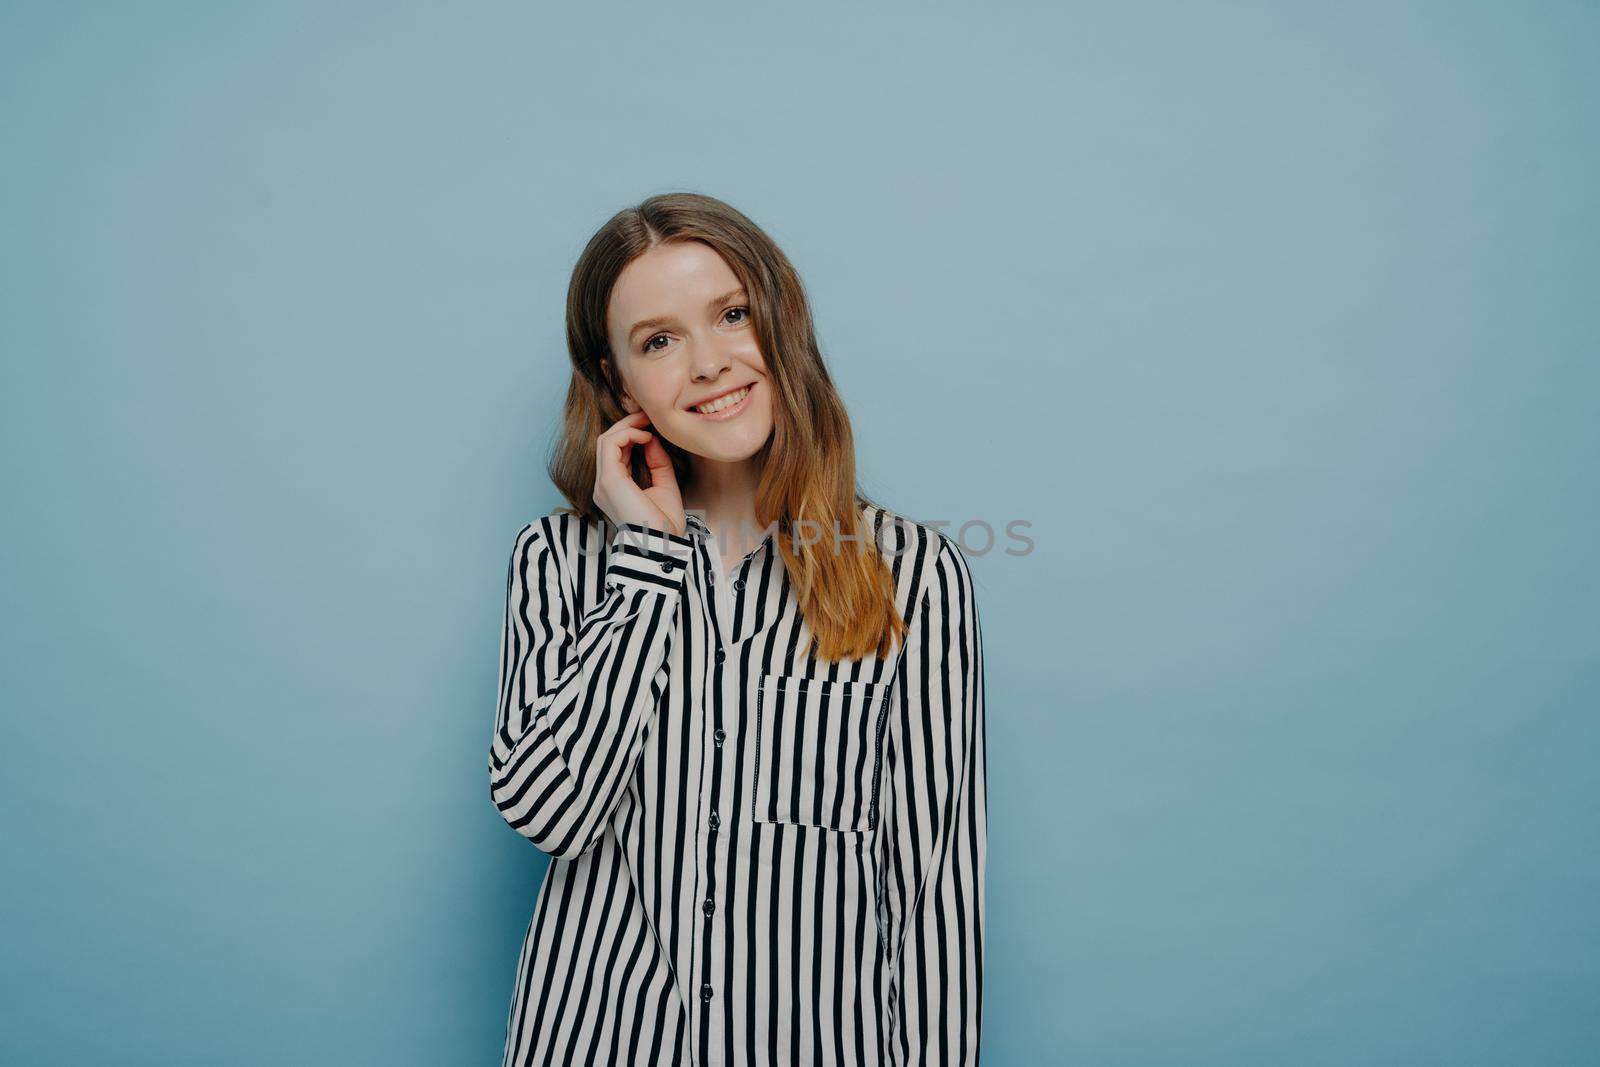 Tender cute european teen girl wearing white shirt with black stripes, expressing her shyness with tilted head and hair behind ear, posing in studio in front of light blue background